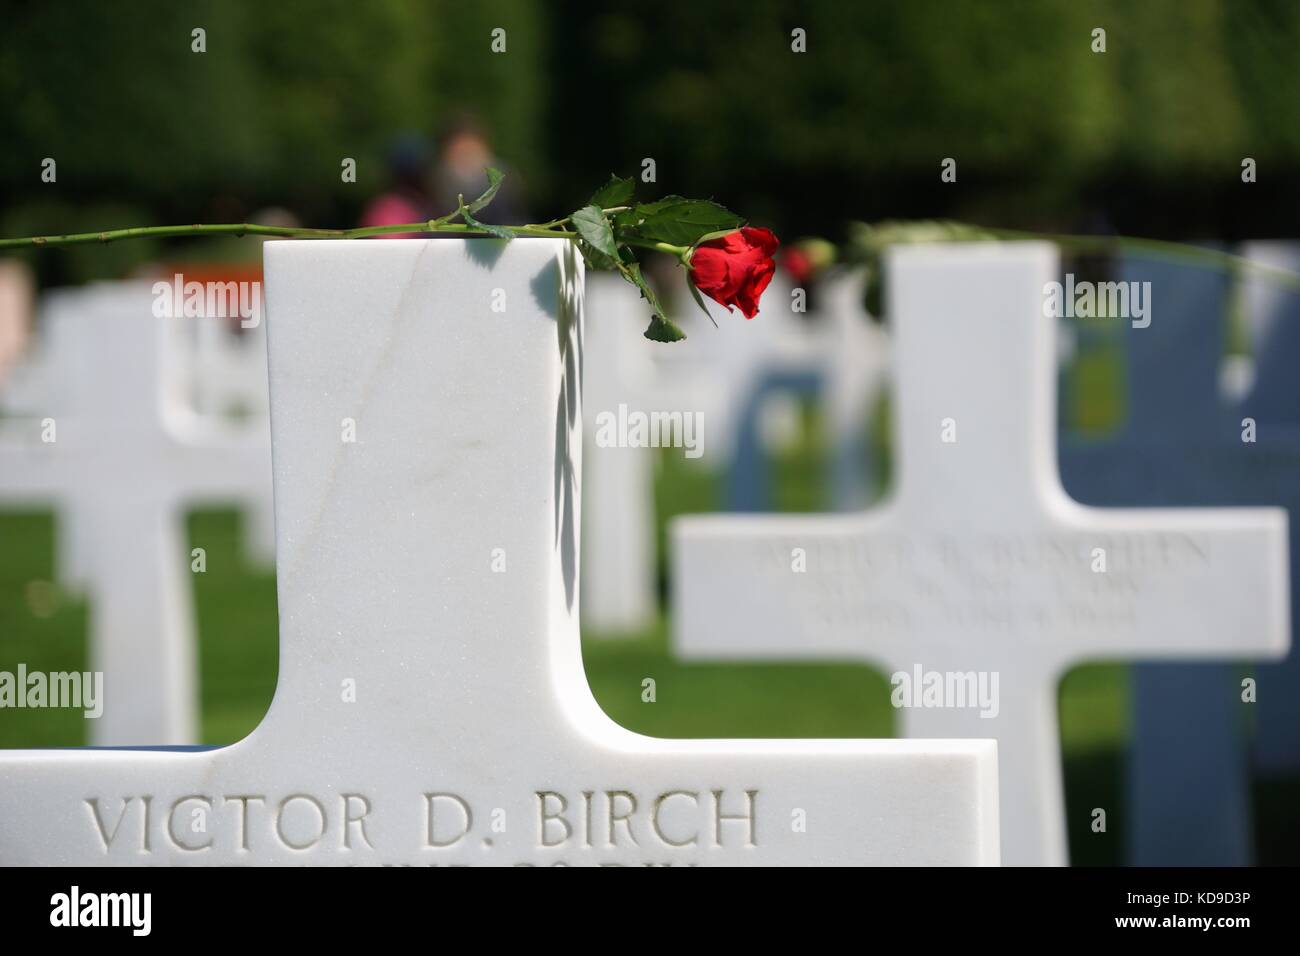 world war 2 memorial white crosses decorated with red rose on grass and trees in background Stock Photo